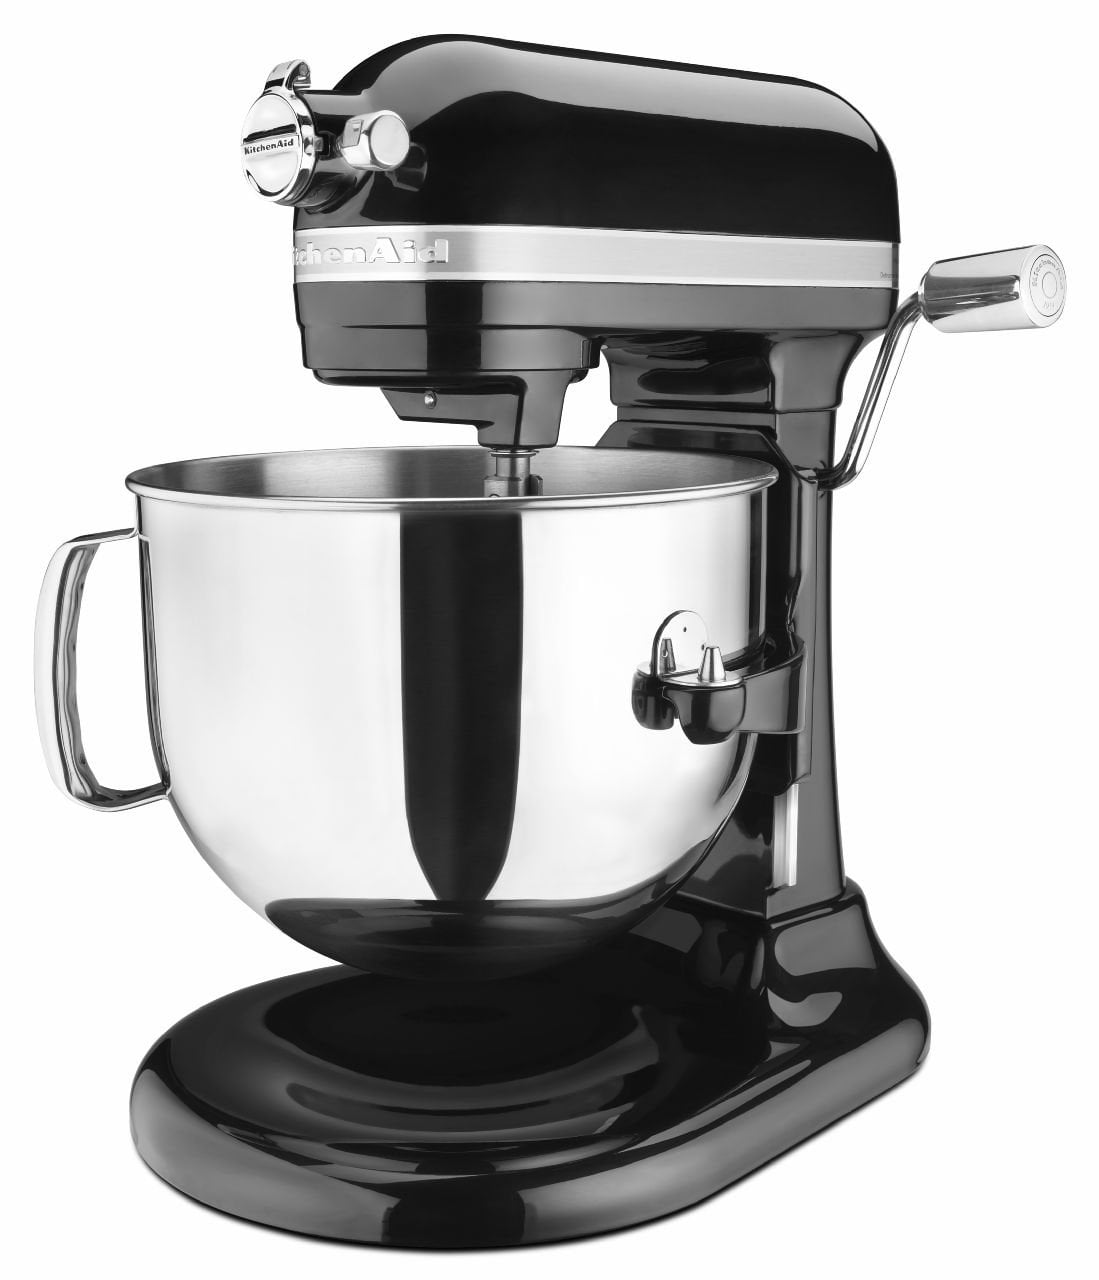 PATTERN - KitchenAid Bowl Lift Pro Line Stand Mixer Partial Clear Cover PDF  Download